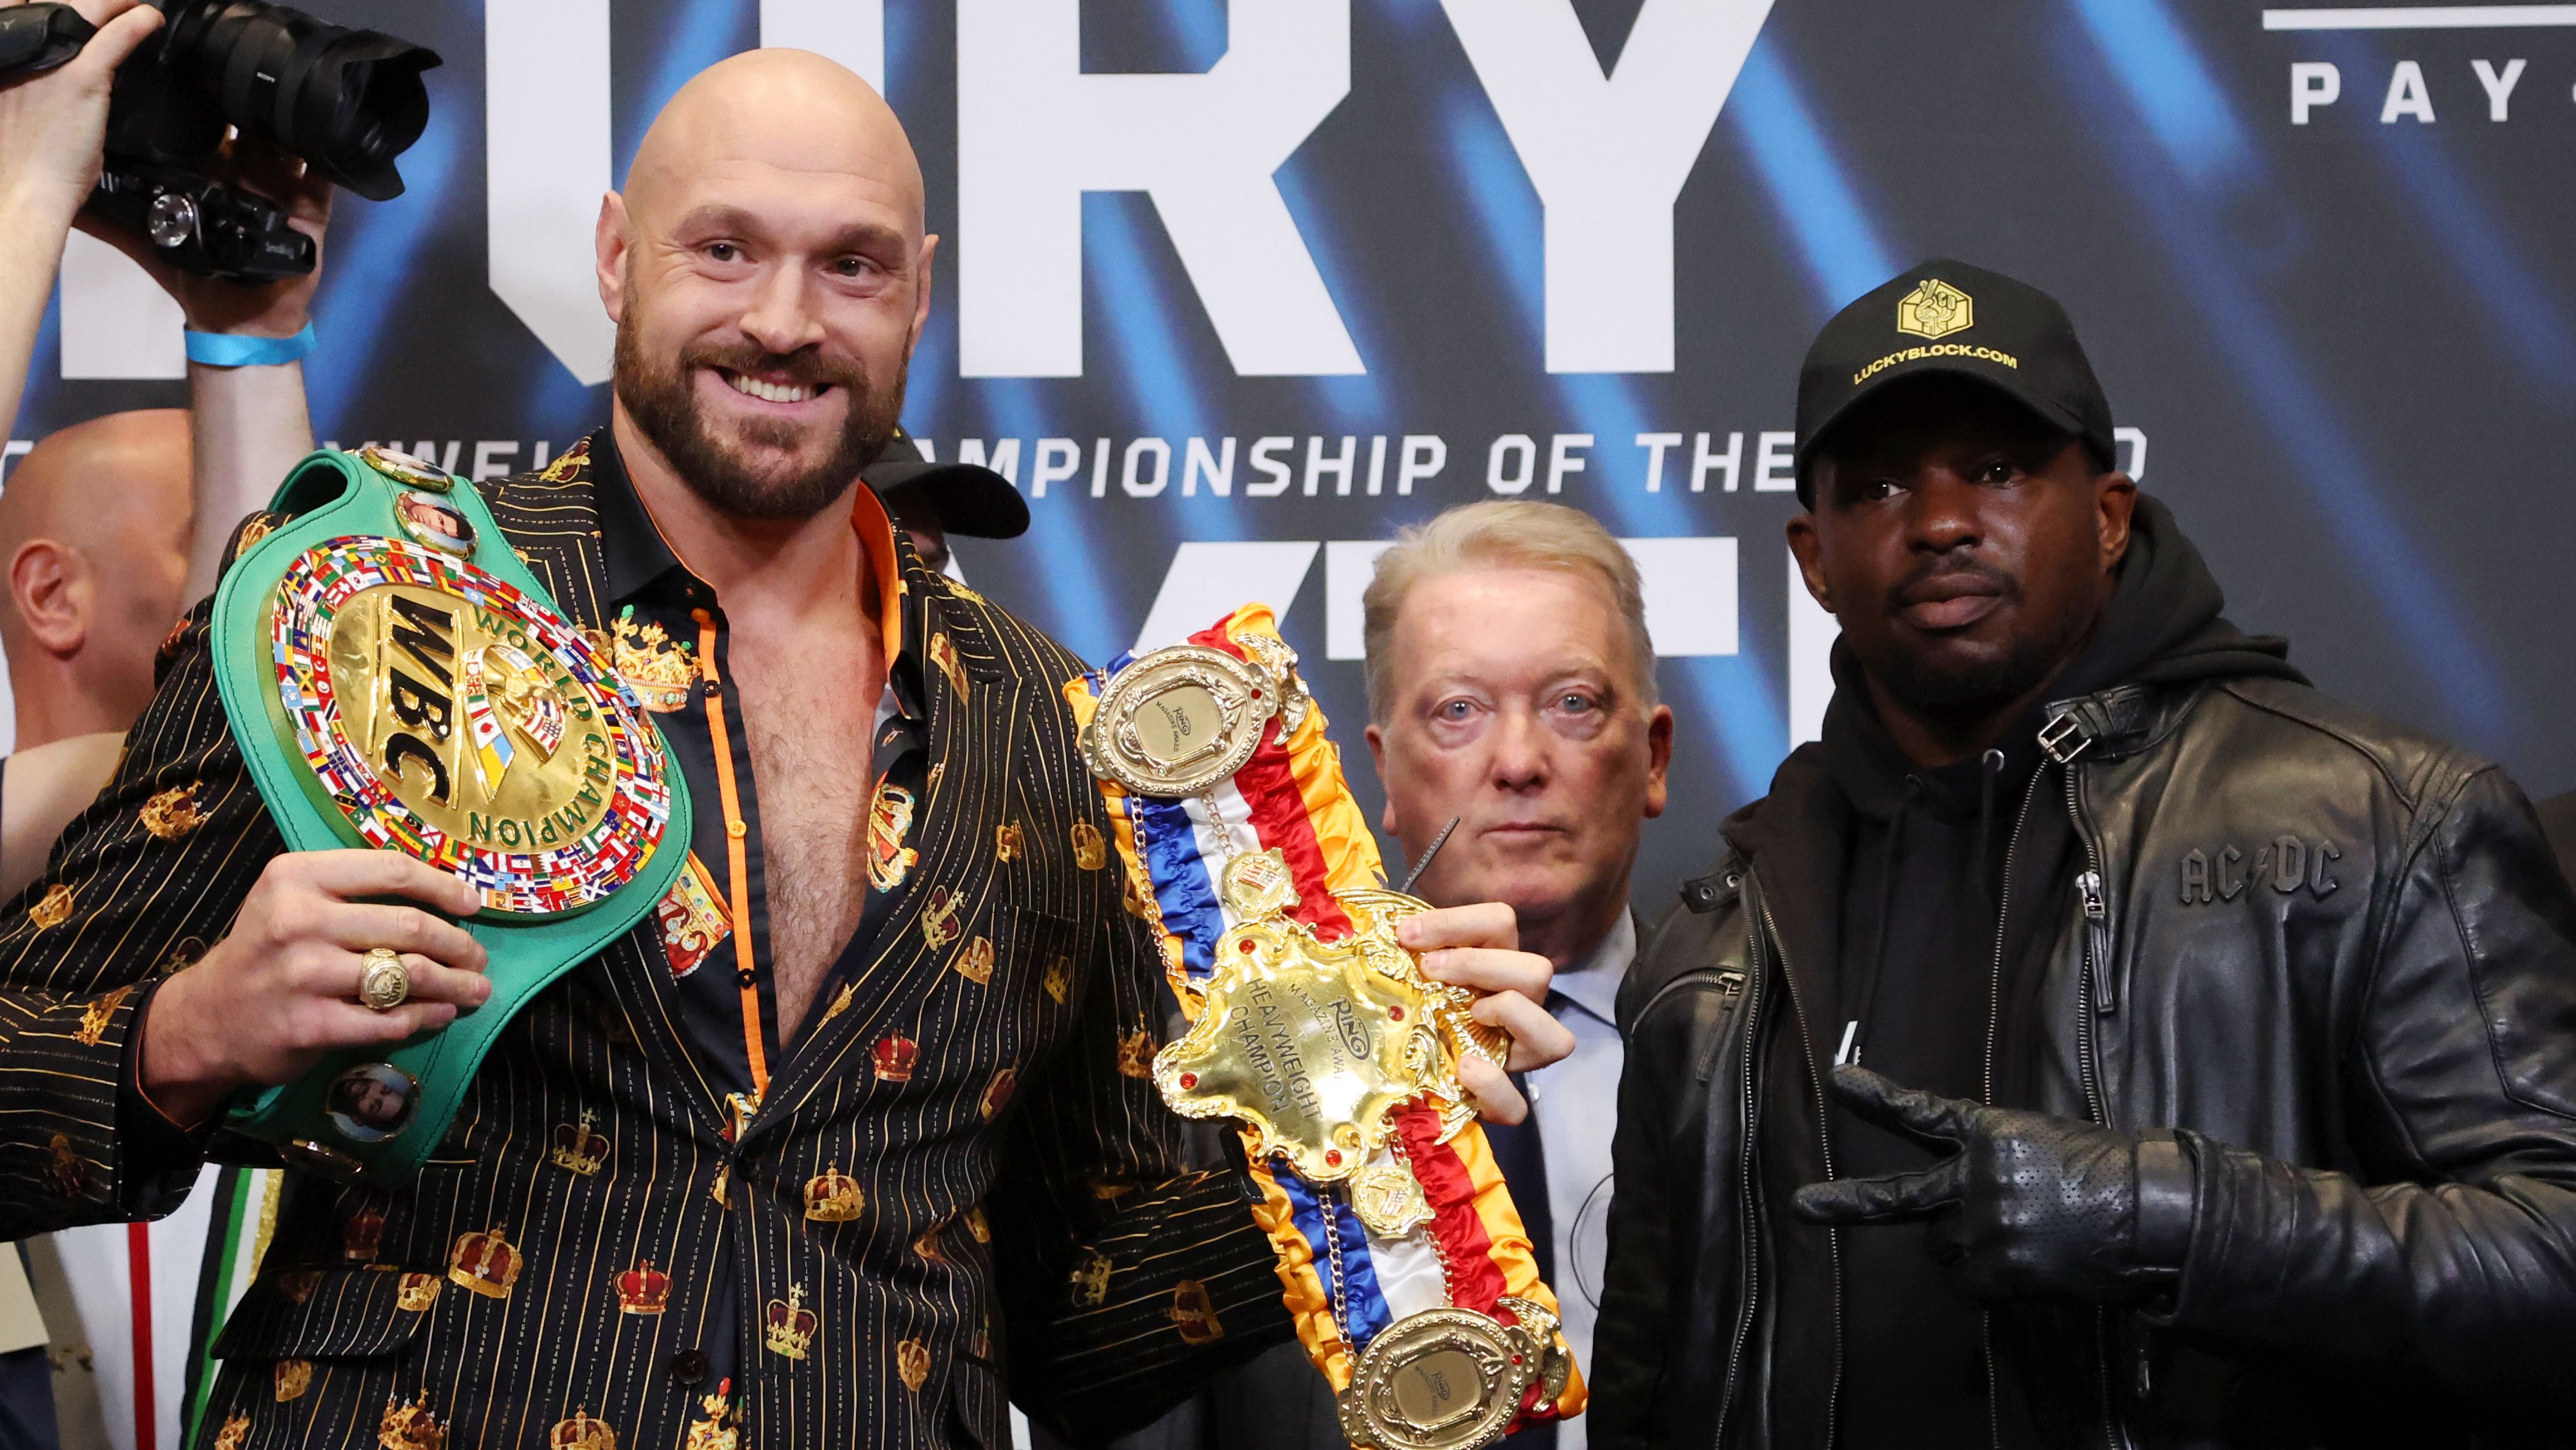 Tyson Fury and Dillian Whyte go head-to-head for the WBC heavyweight title on Saturday.